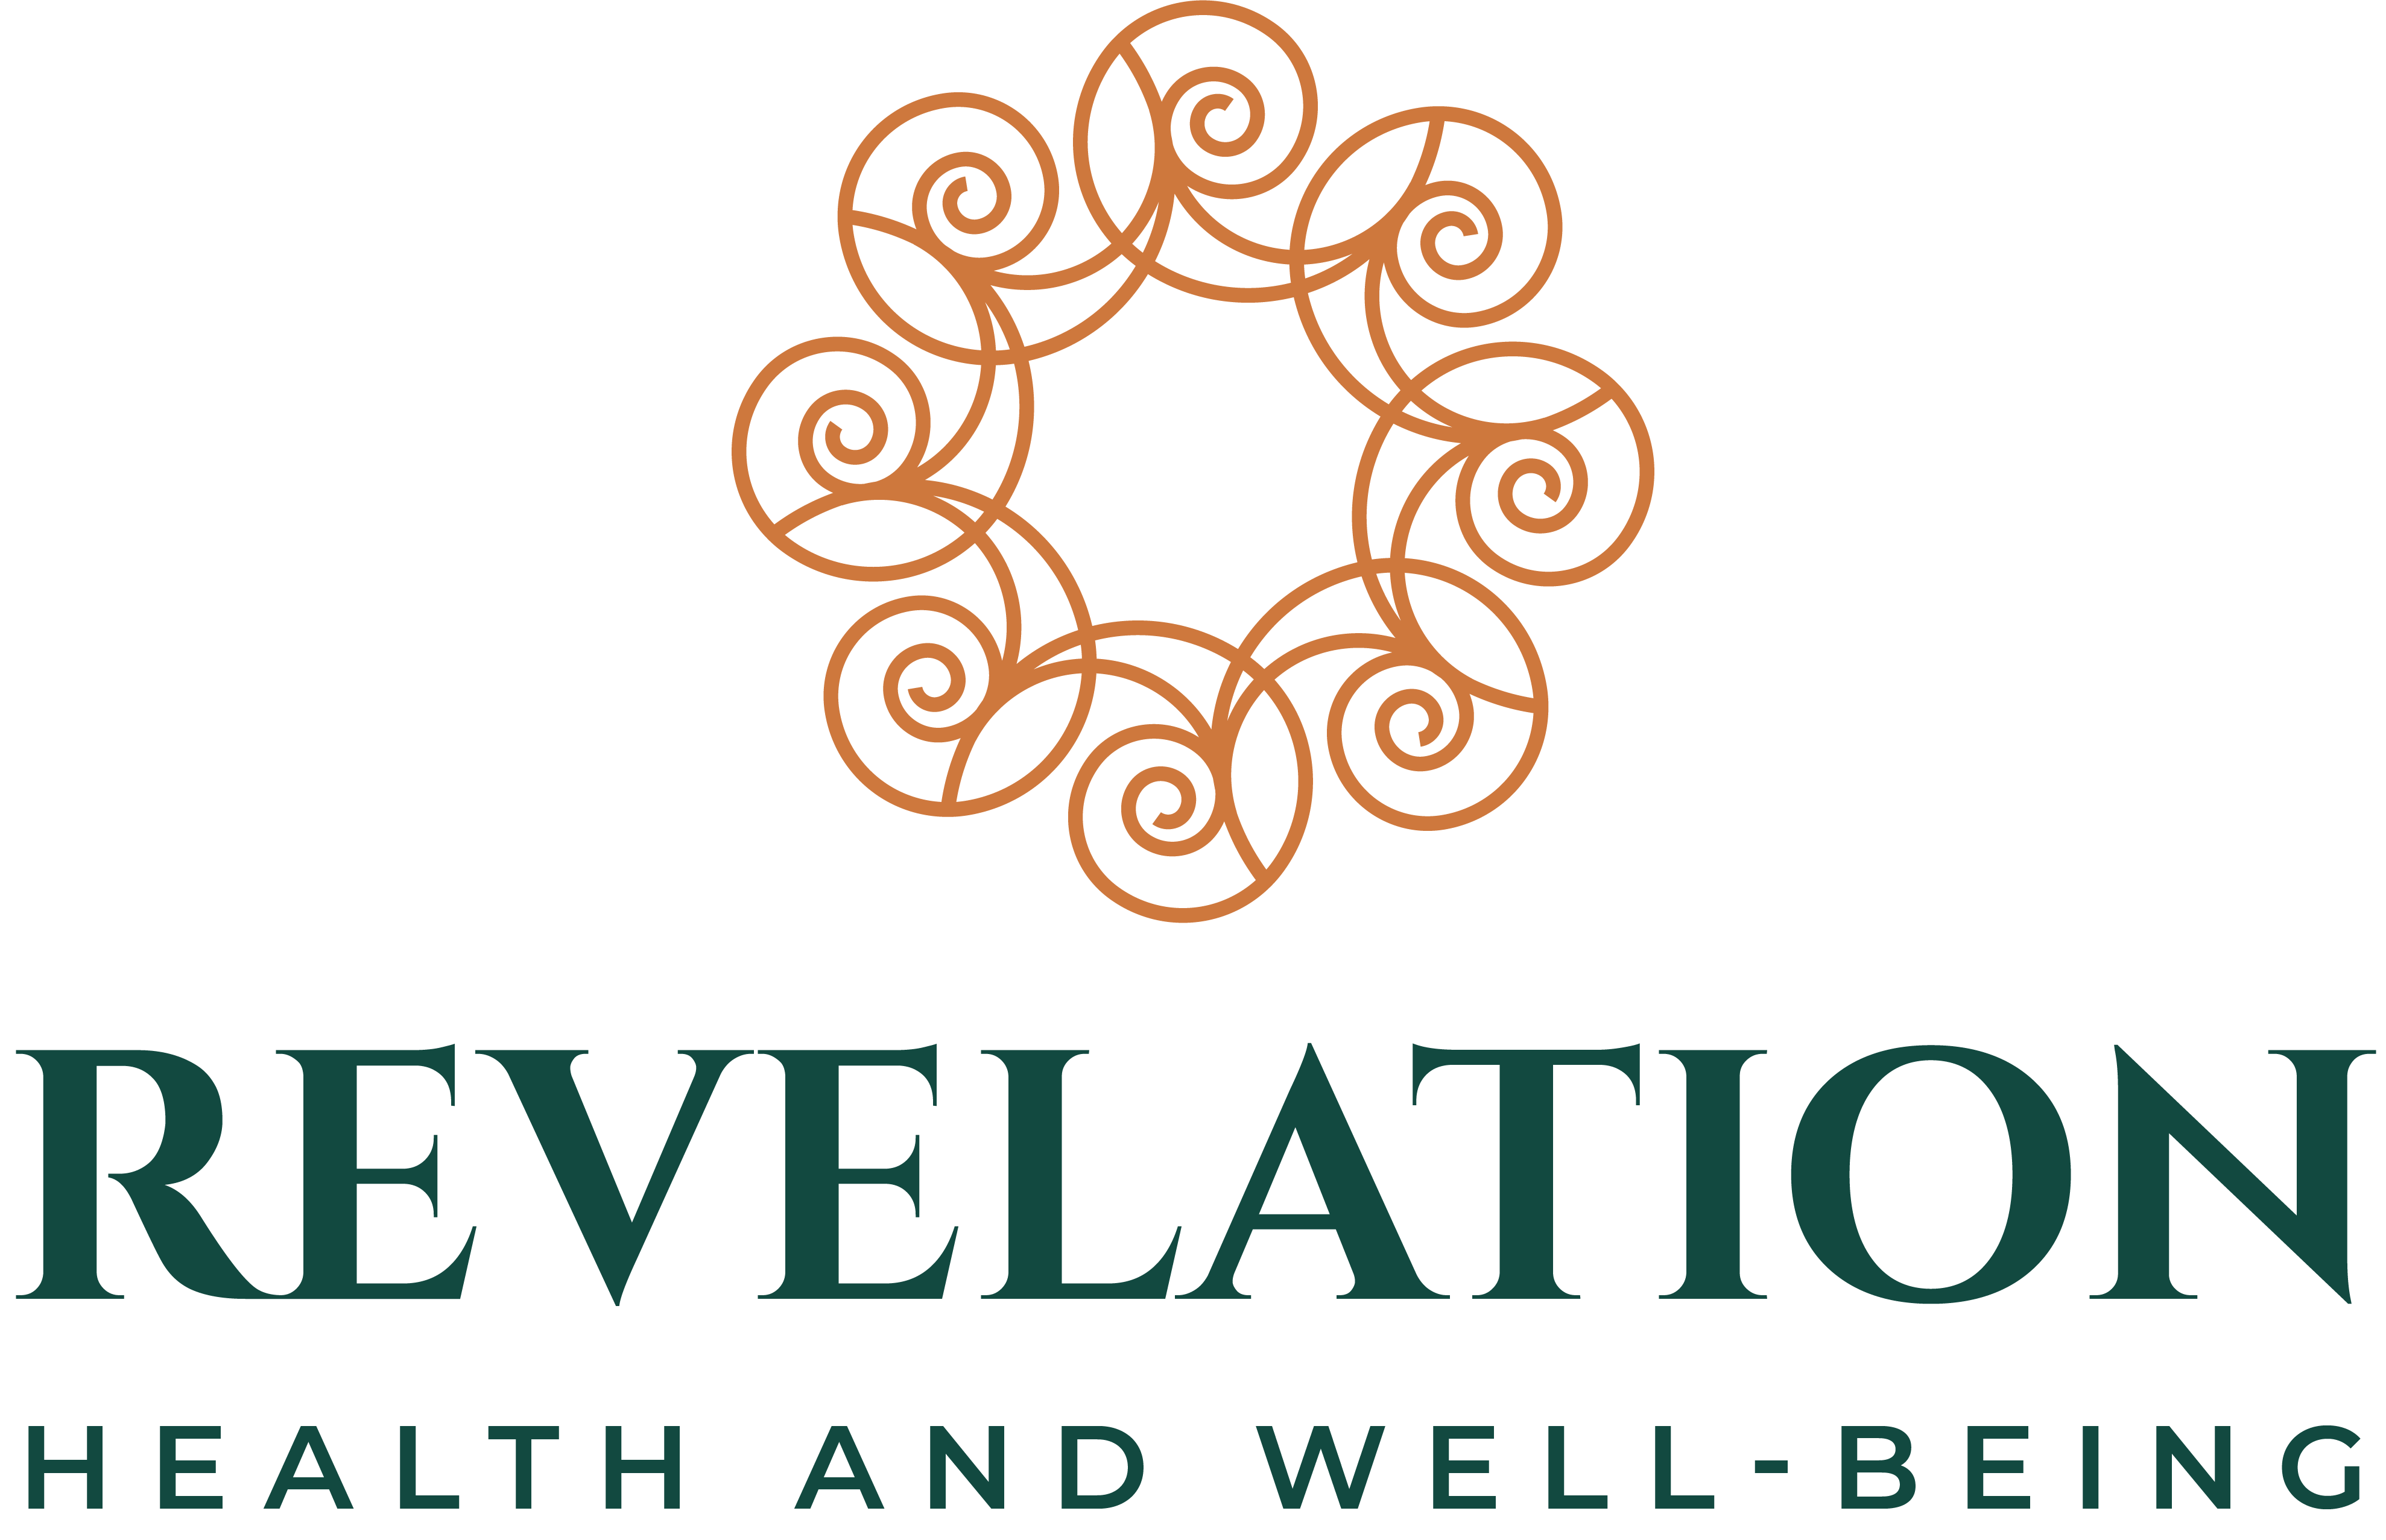 Revelation Health and Wellbeing